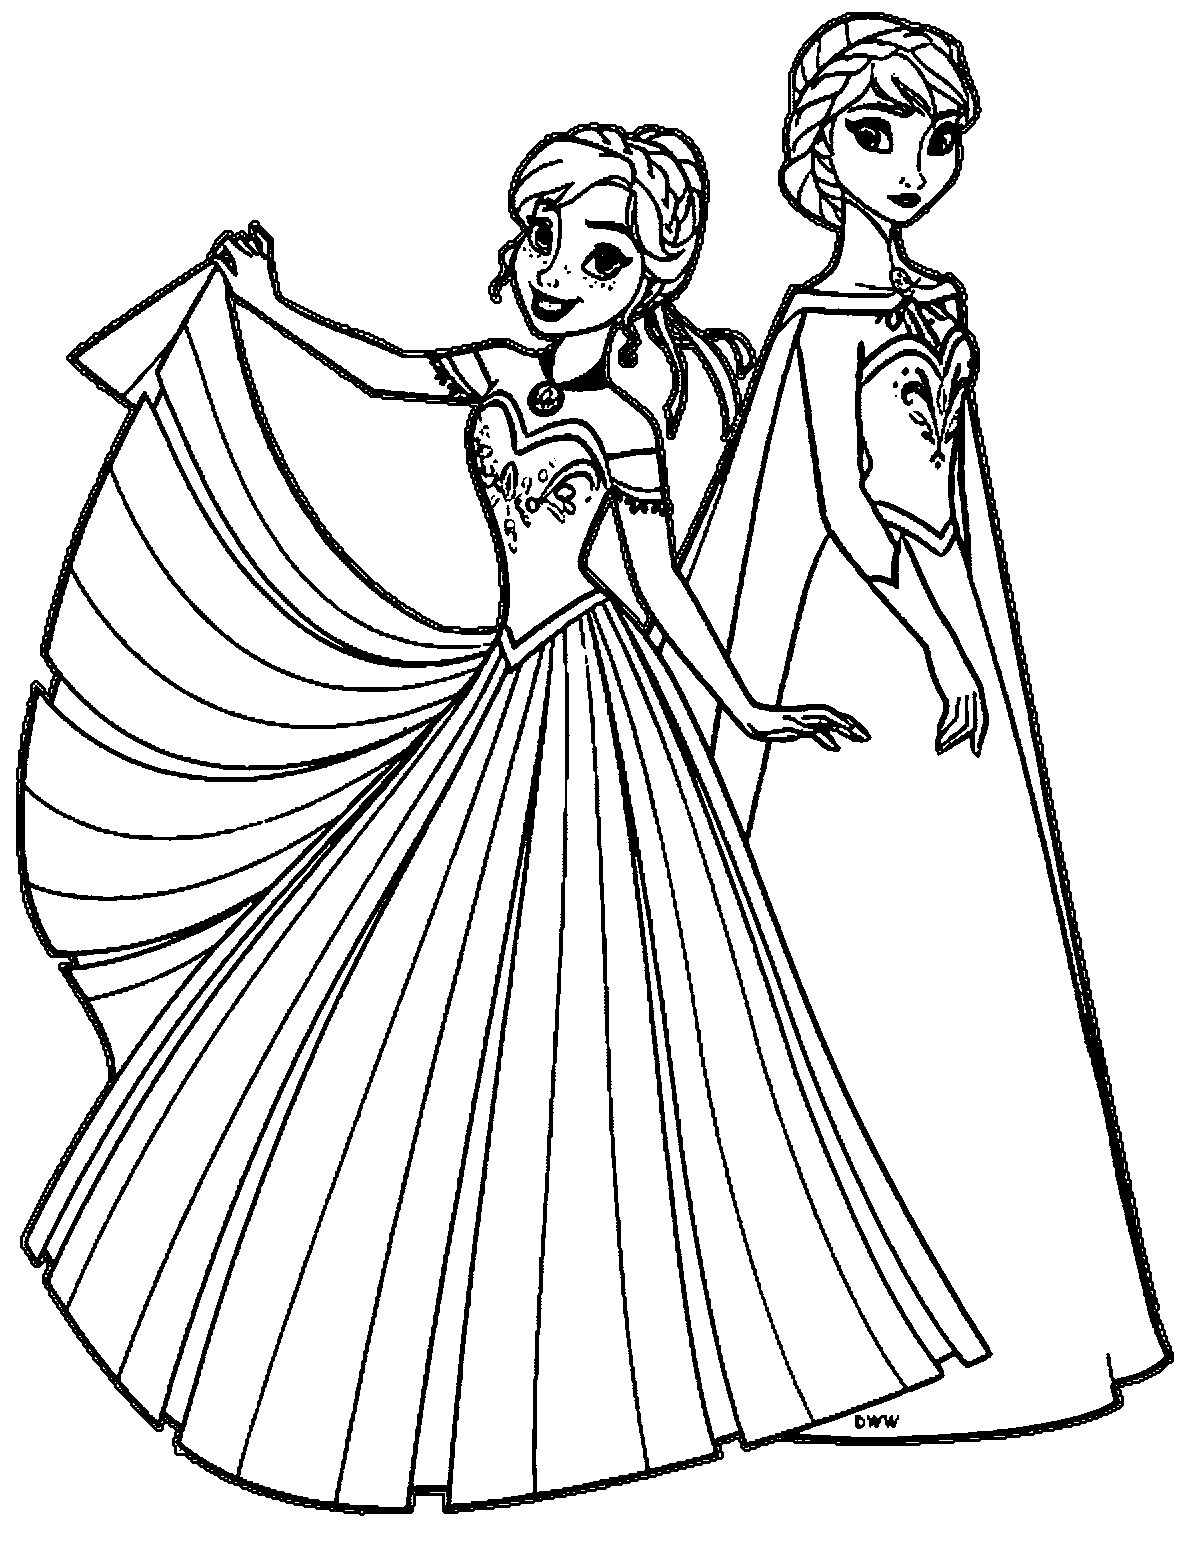 free coloring pages elsa and anna elsa and anna coloring pages coloring home anna coloring pages and elsa free 